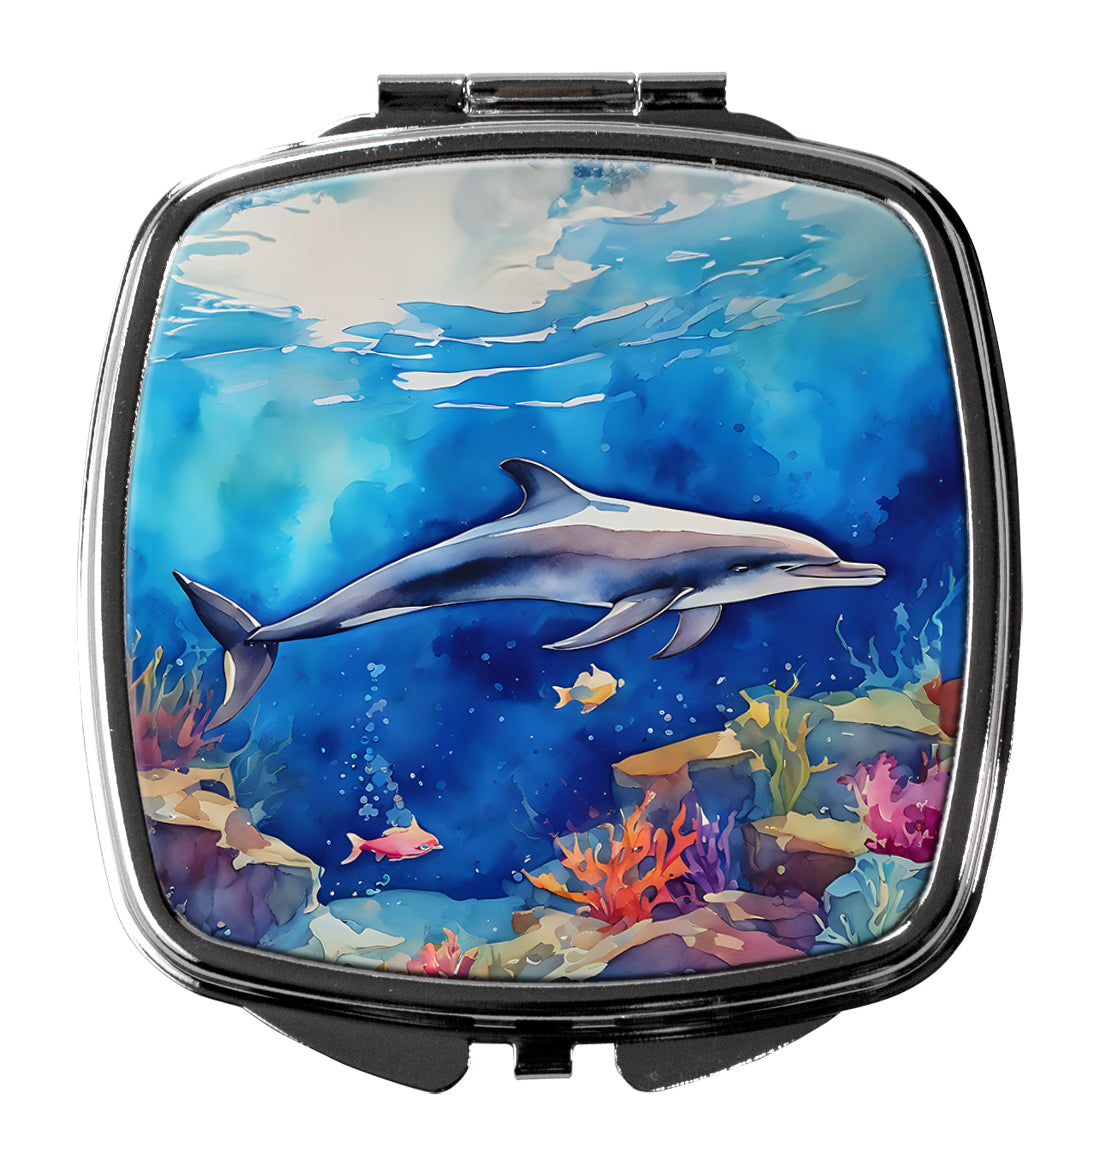 Buy this Dolphin Compact Mirror